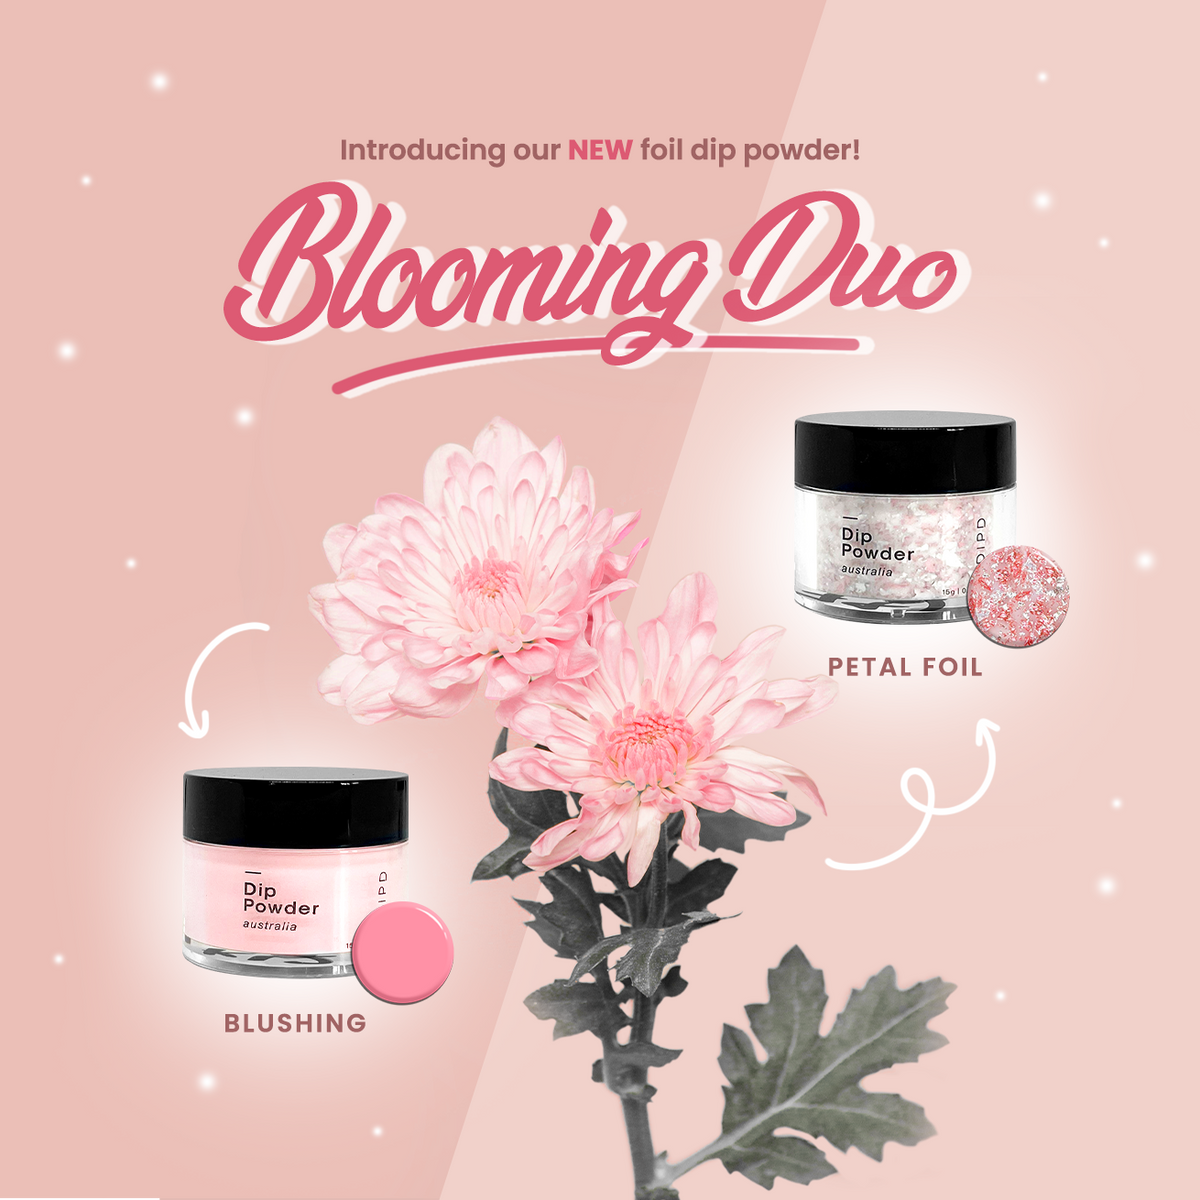 Blooming Duo